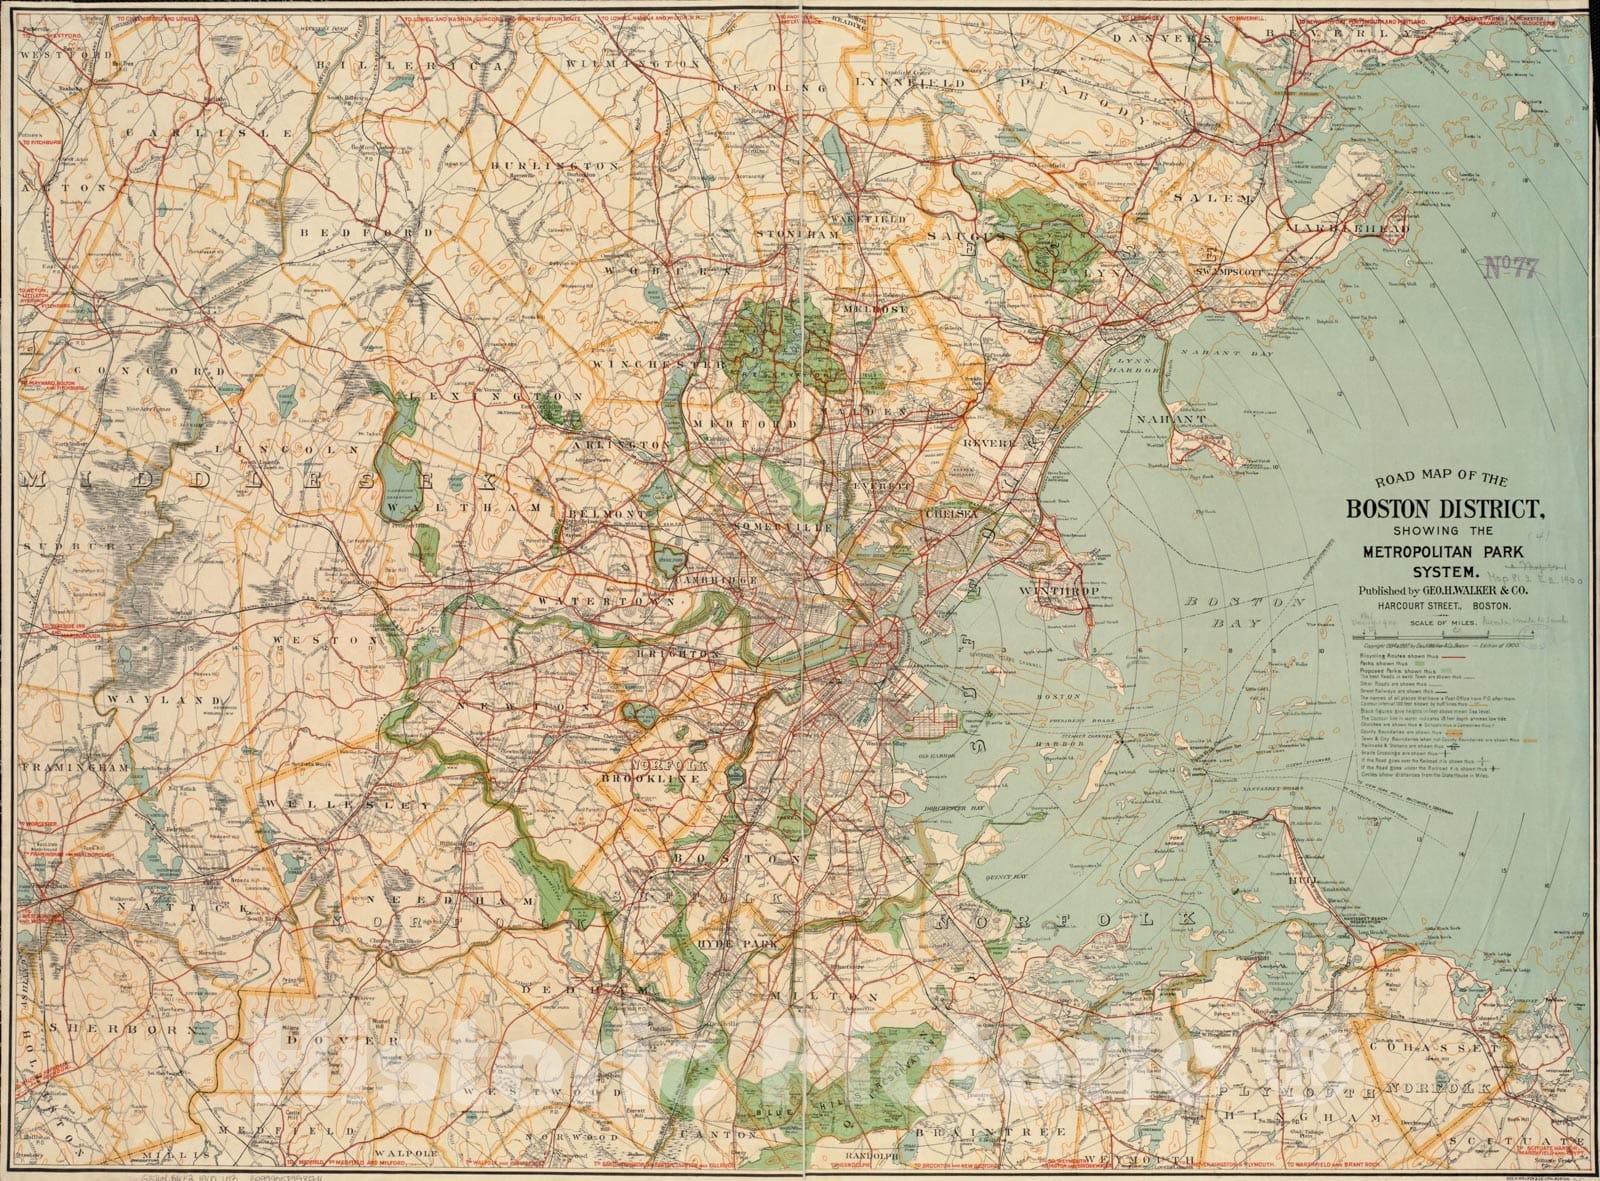 Historical Map, 1900 Road map of the Boston district showing the metropolitan park system, Vintage Wall Art